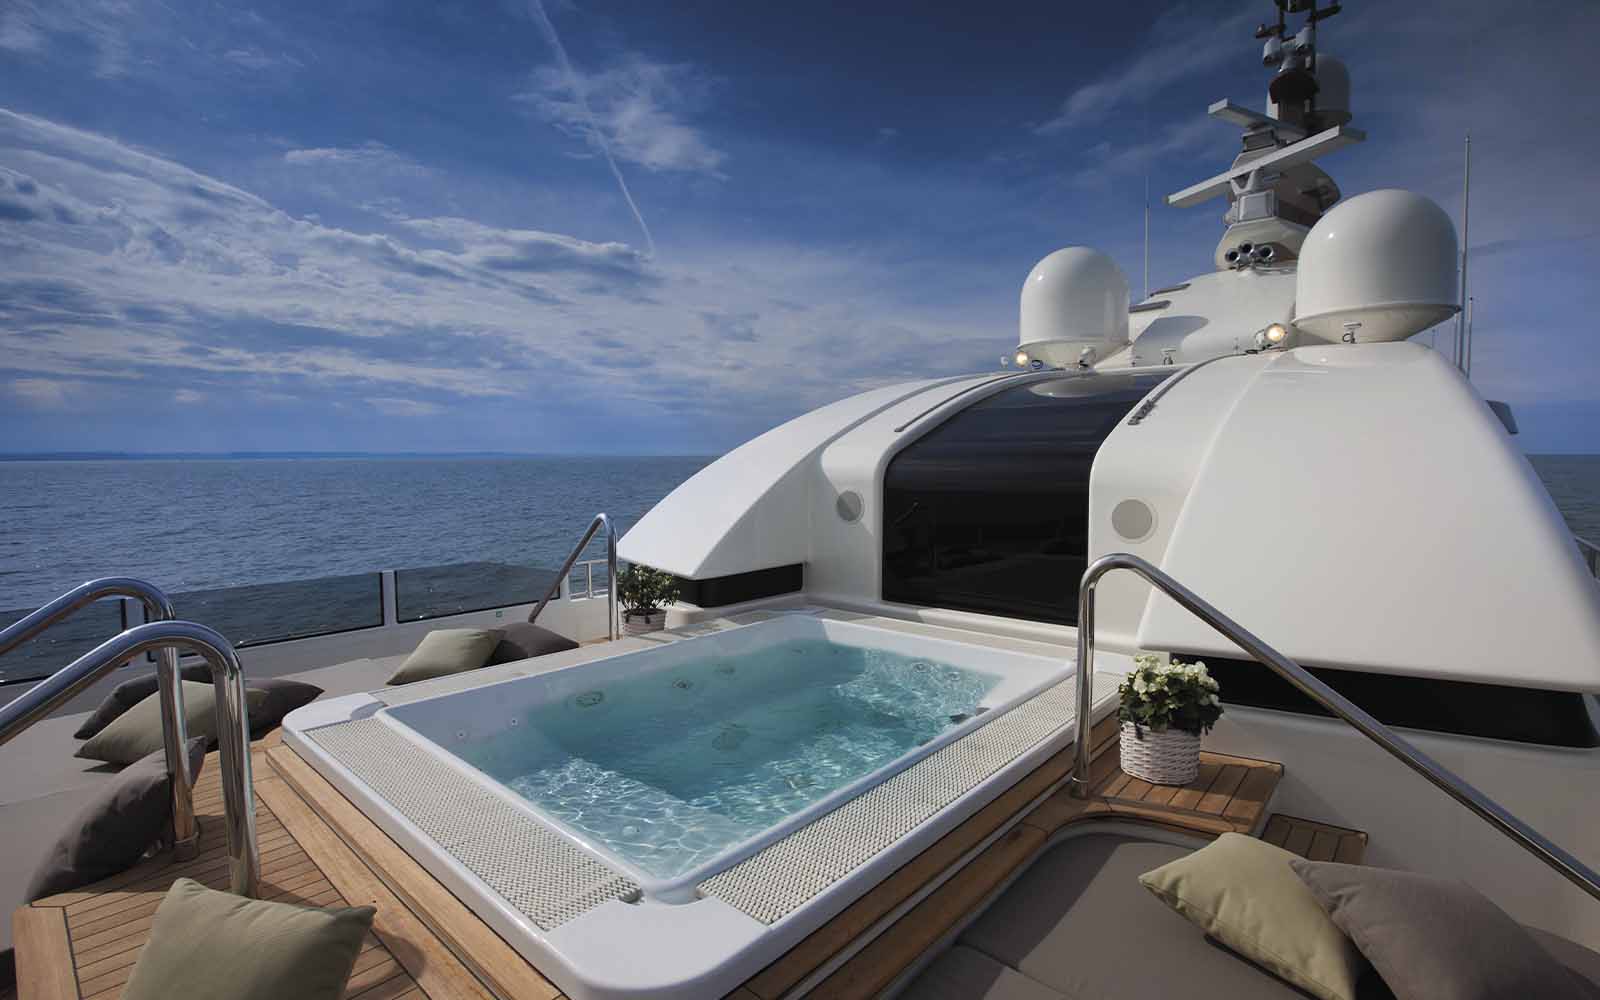 superiate crn yacht - boat shopping